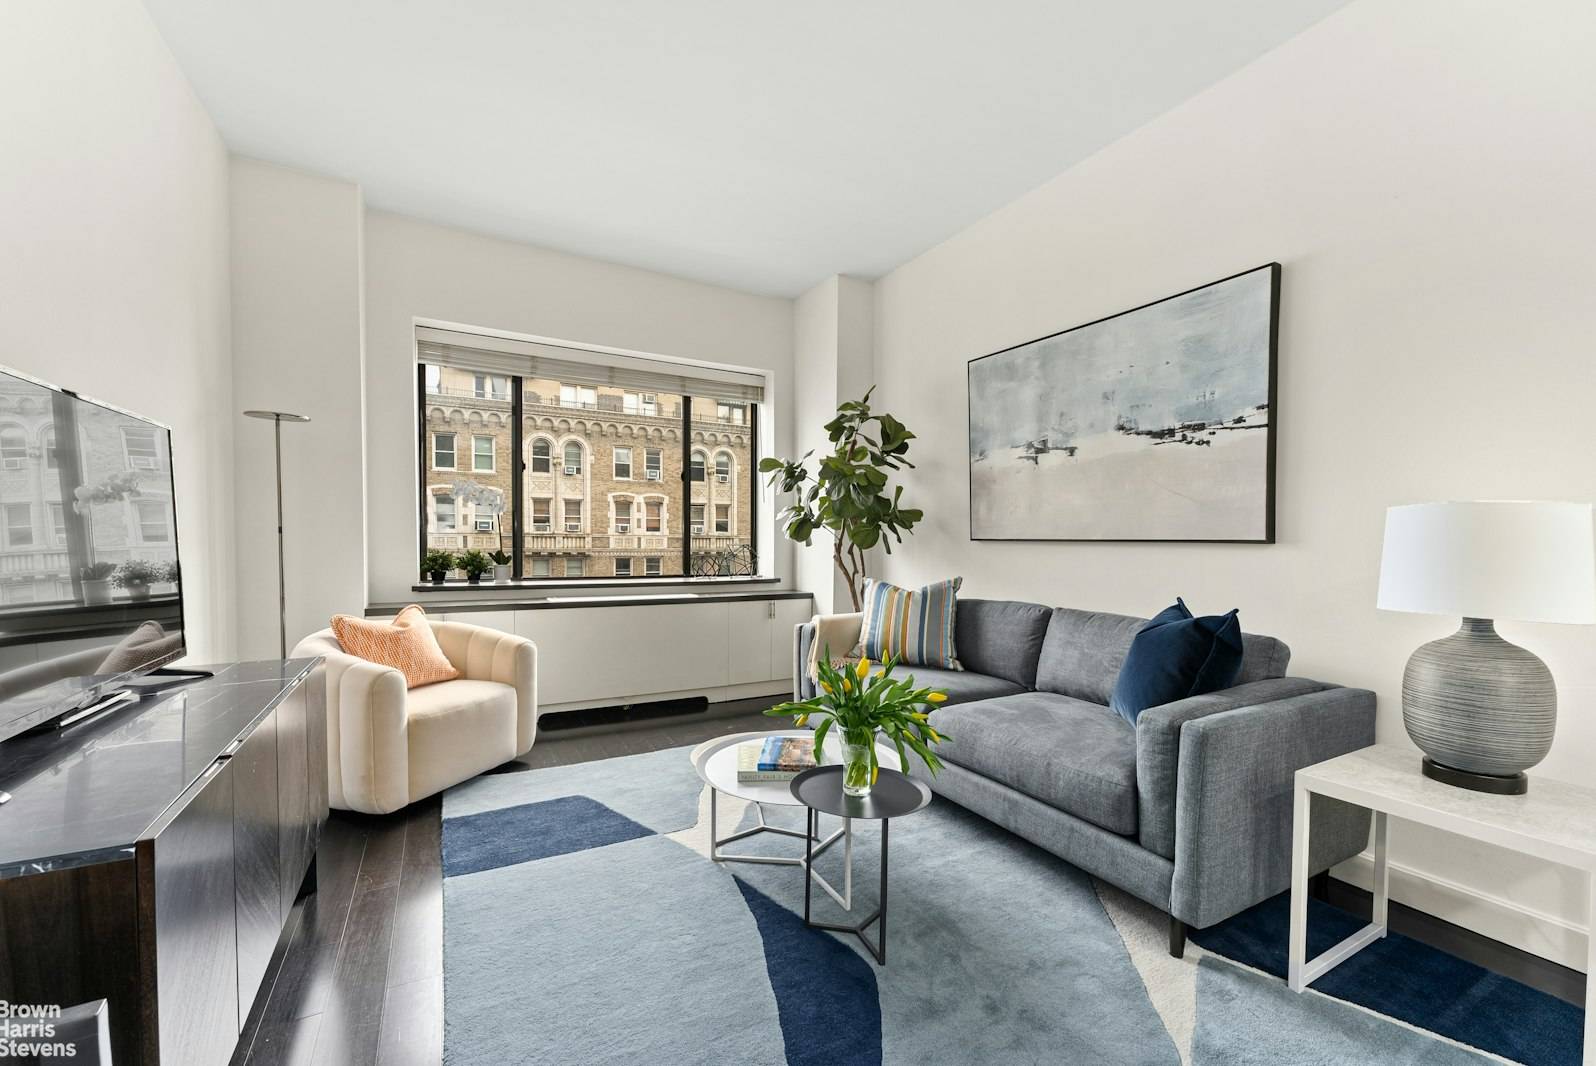 Welcome to this sophisticated Museum block one bedroom gem in the heart of the Upper West Side.